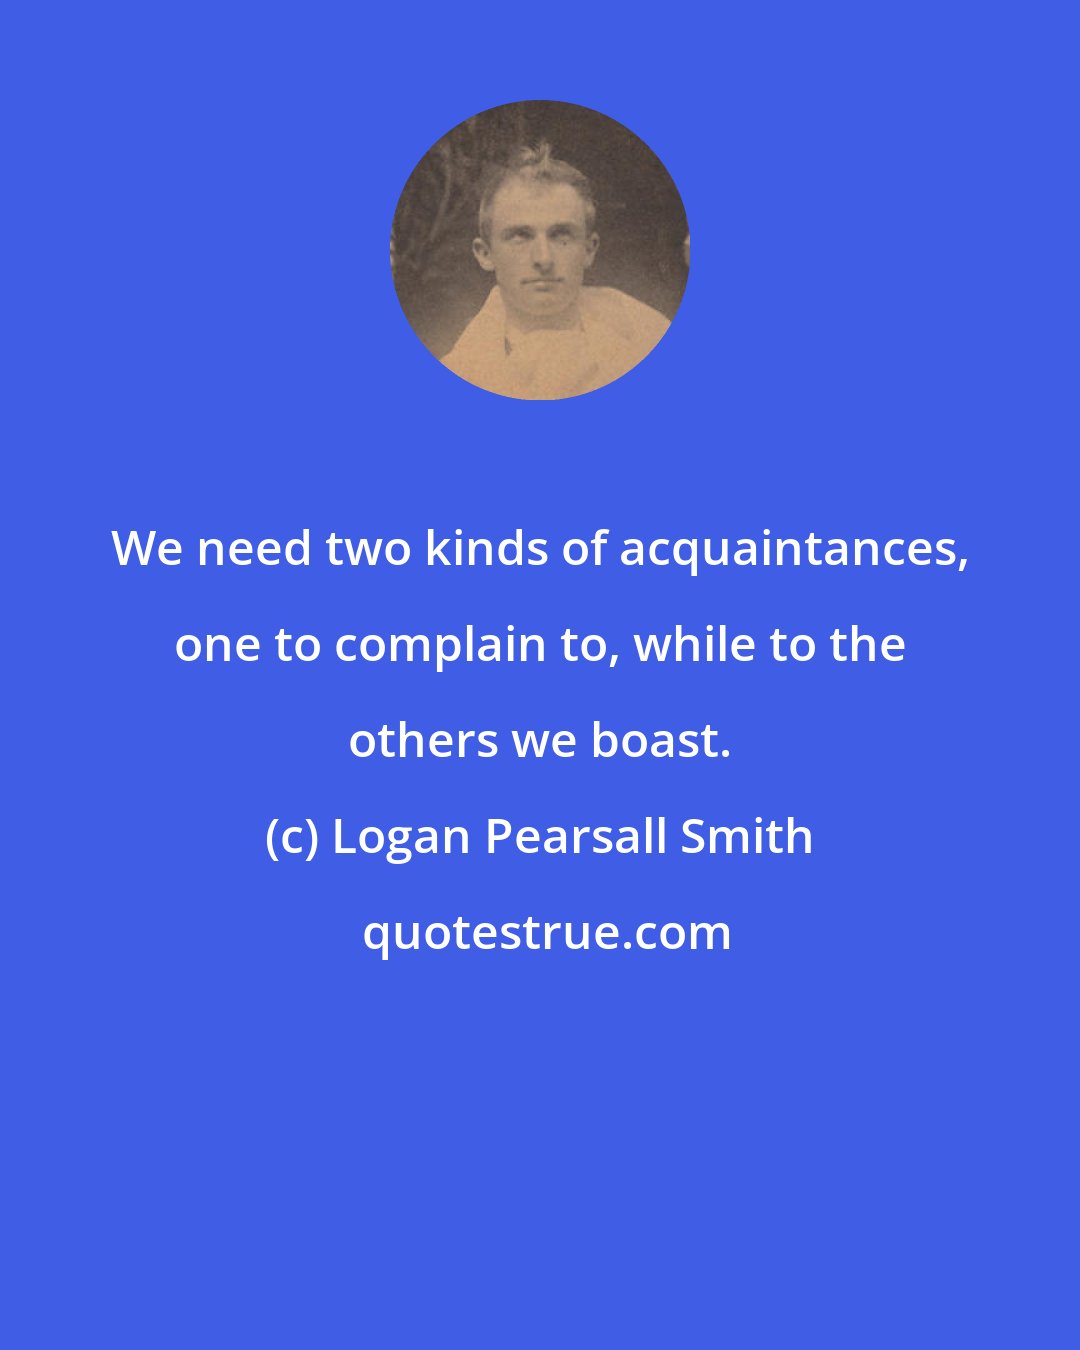 Logan Pearsall Smith: We need two kinds of acquaintances, one to complain to, while to the others we boast.